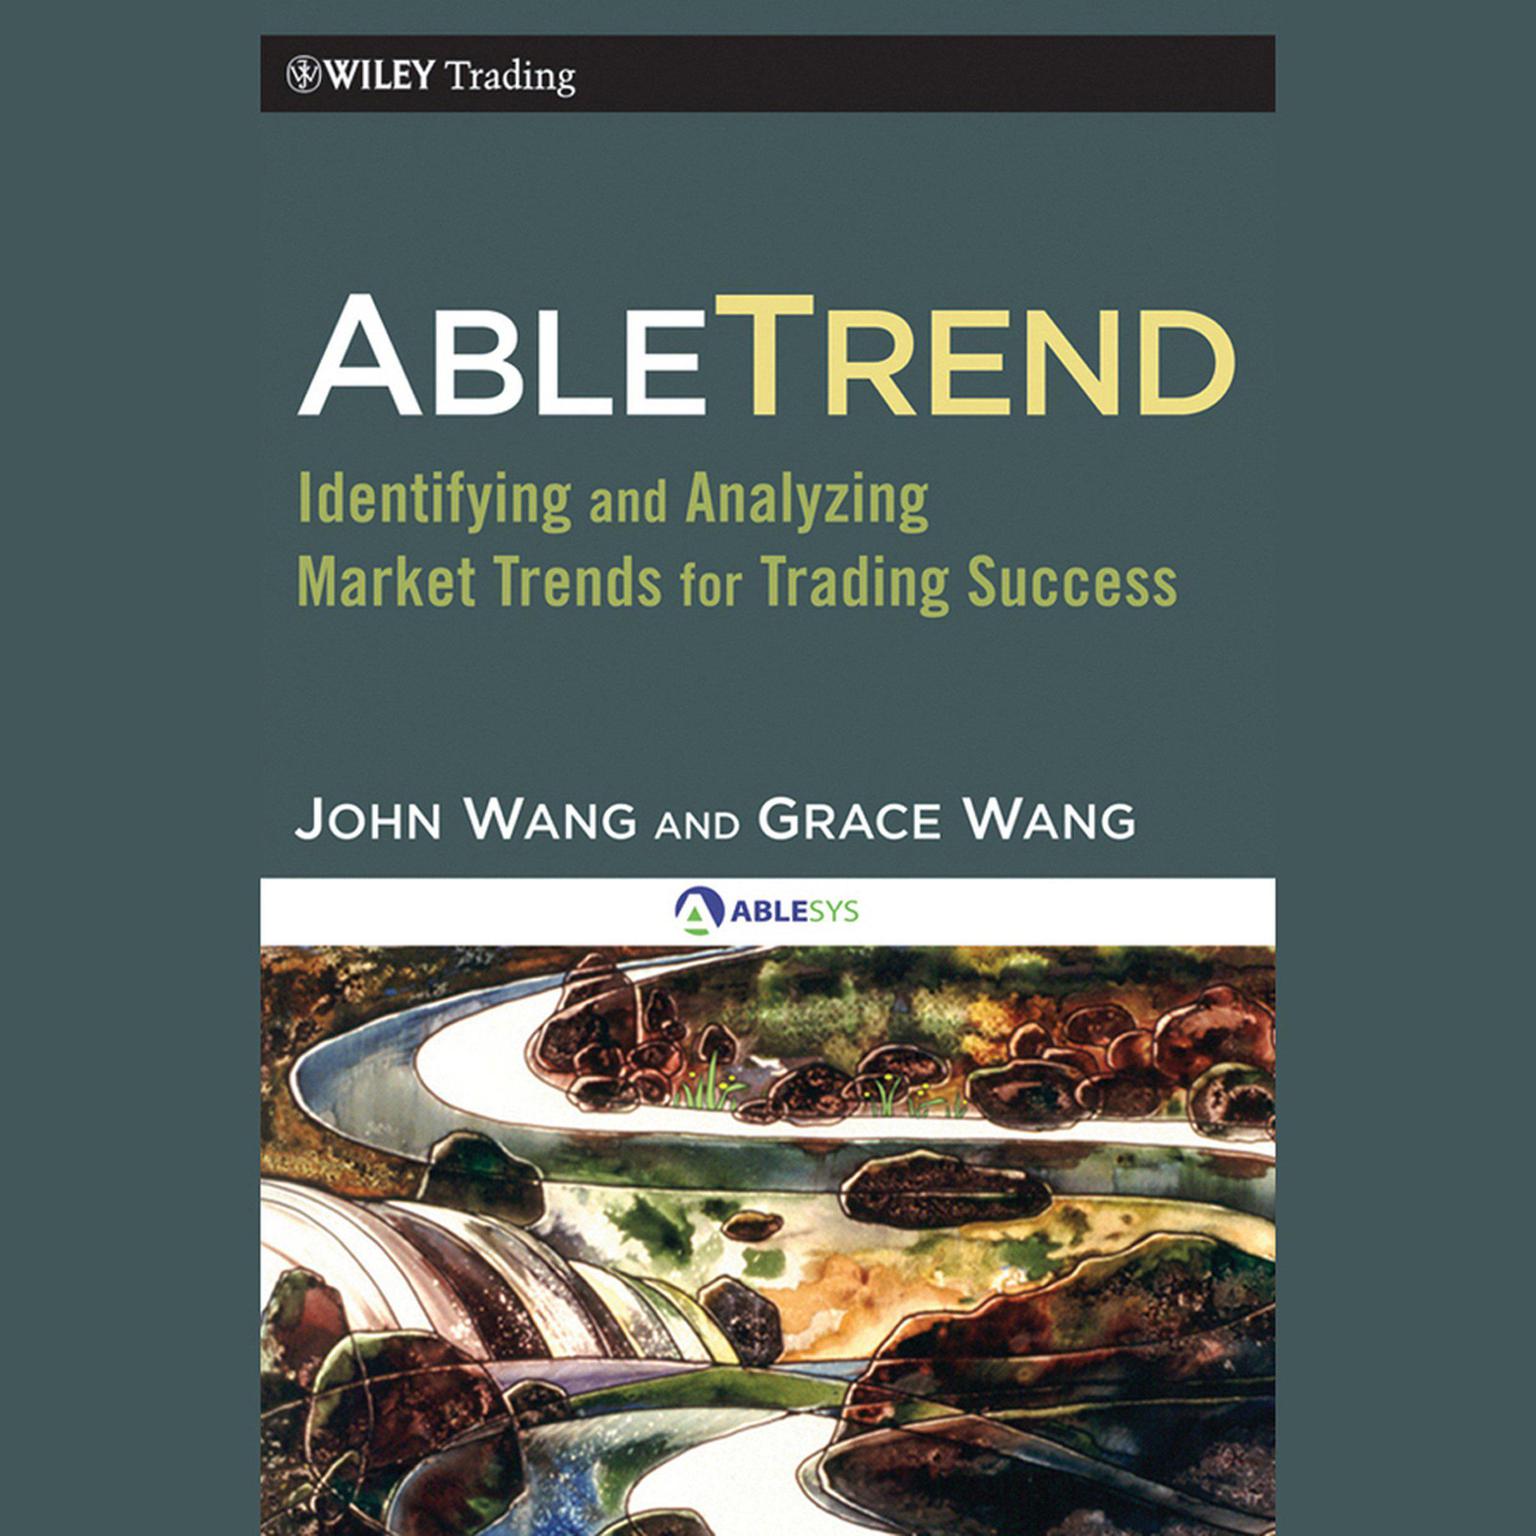 AbleTrend: Identifying and Analyzing Market Trends for Trading Success Audiobook, by John Wang